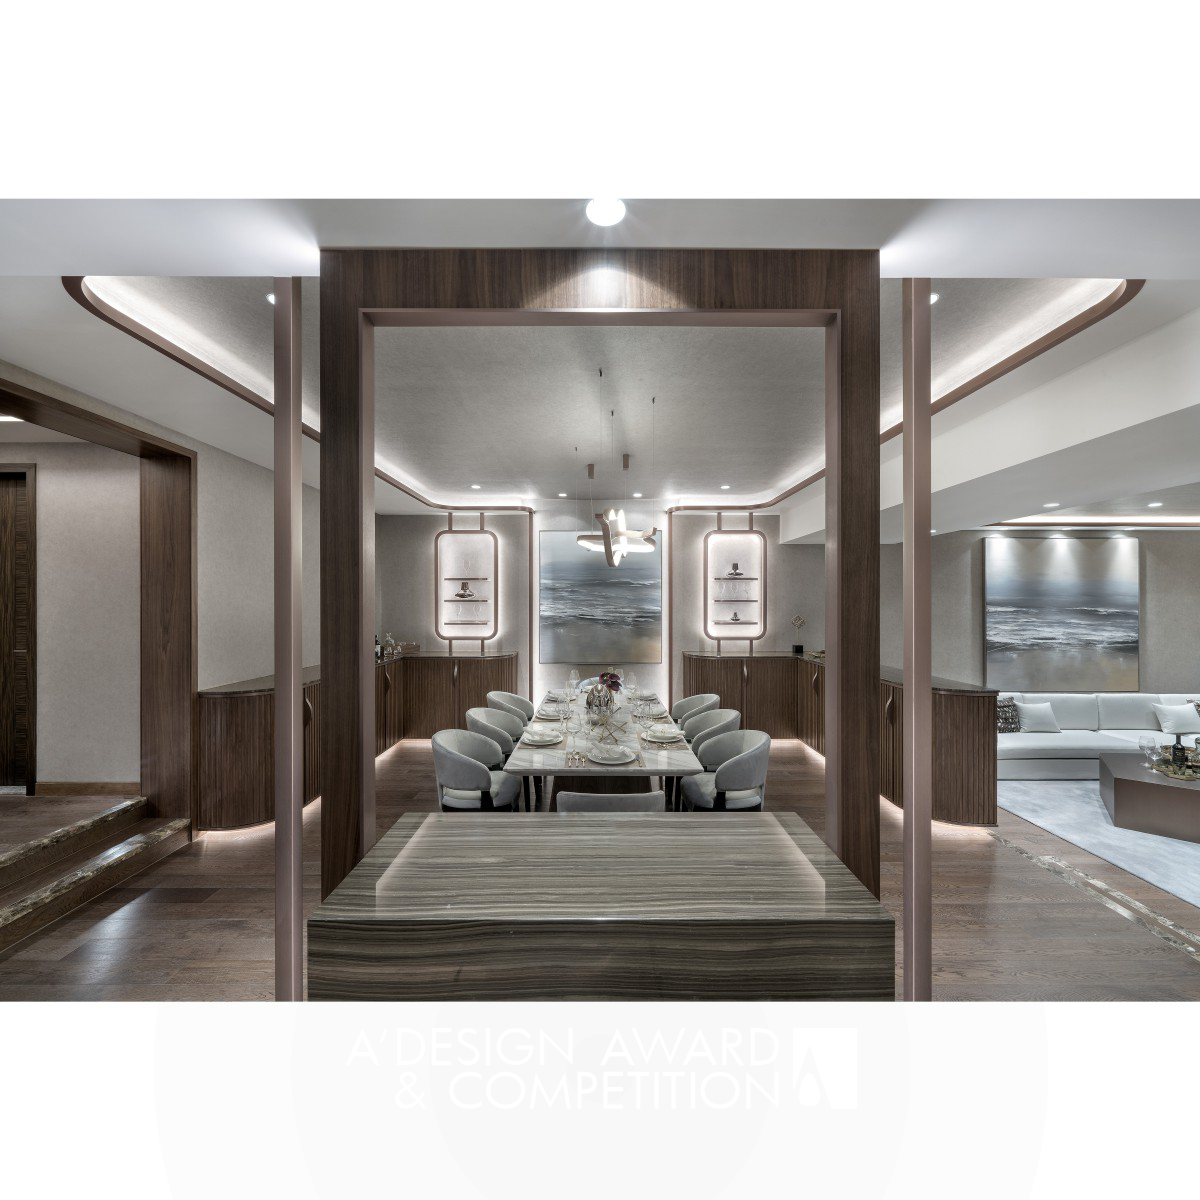 The Grandeur Show Home by Chiu Chi Ming Danny